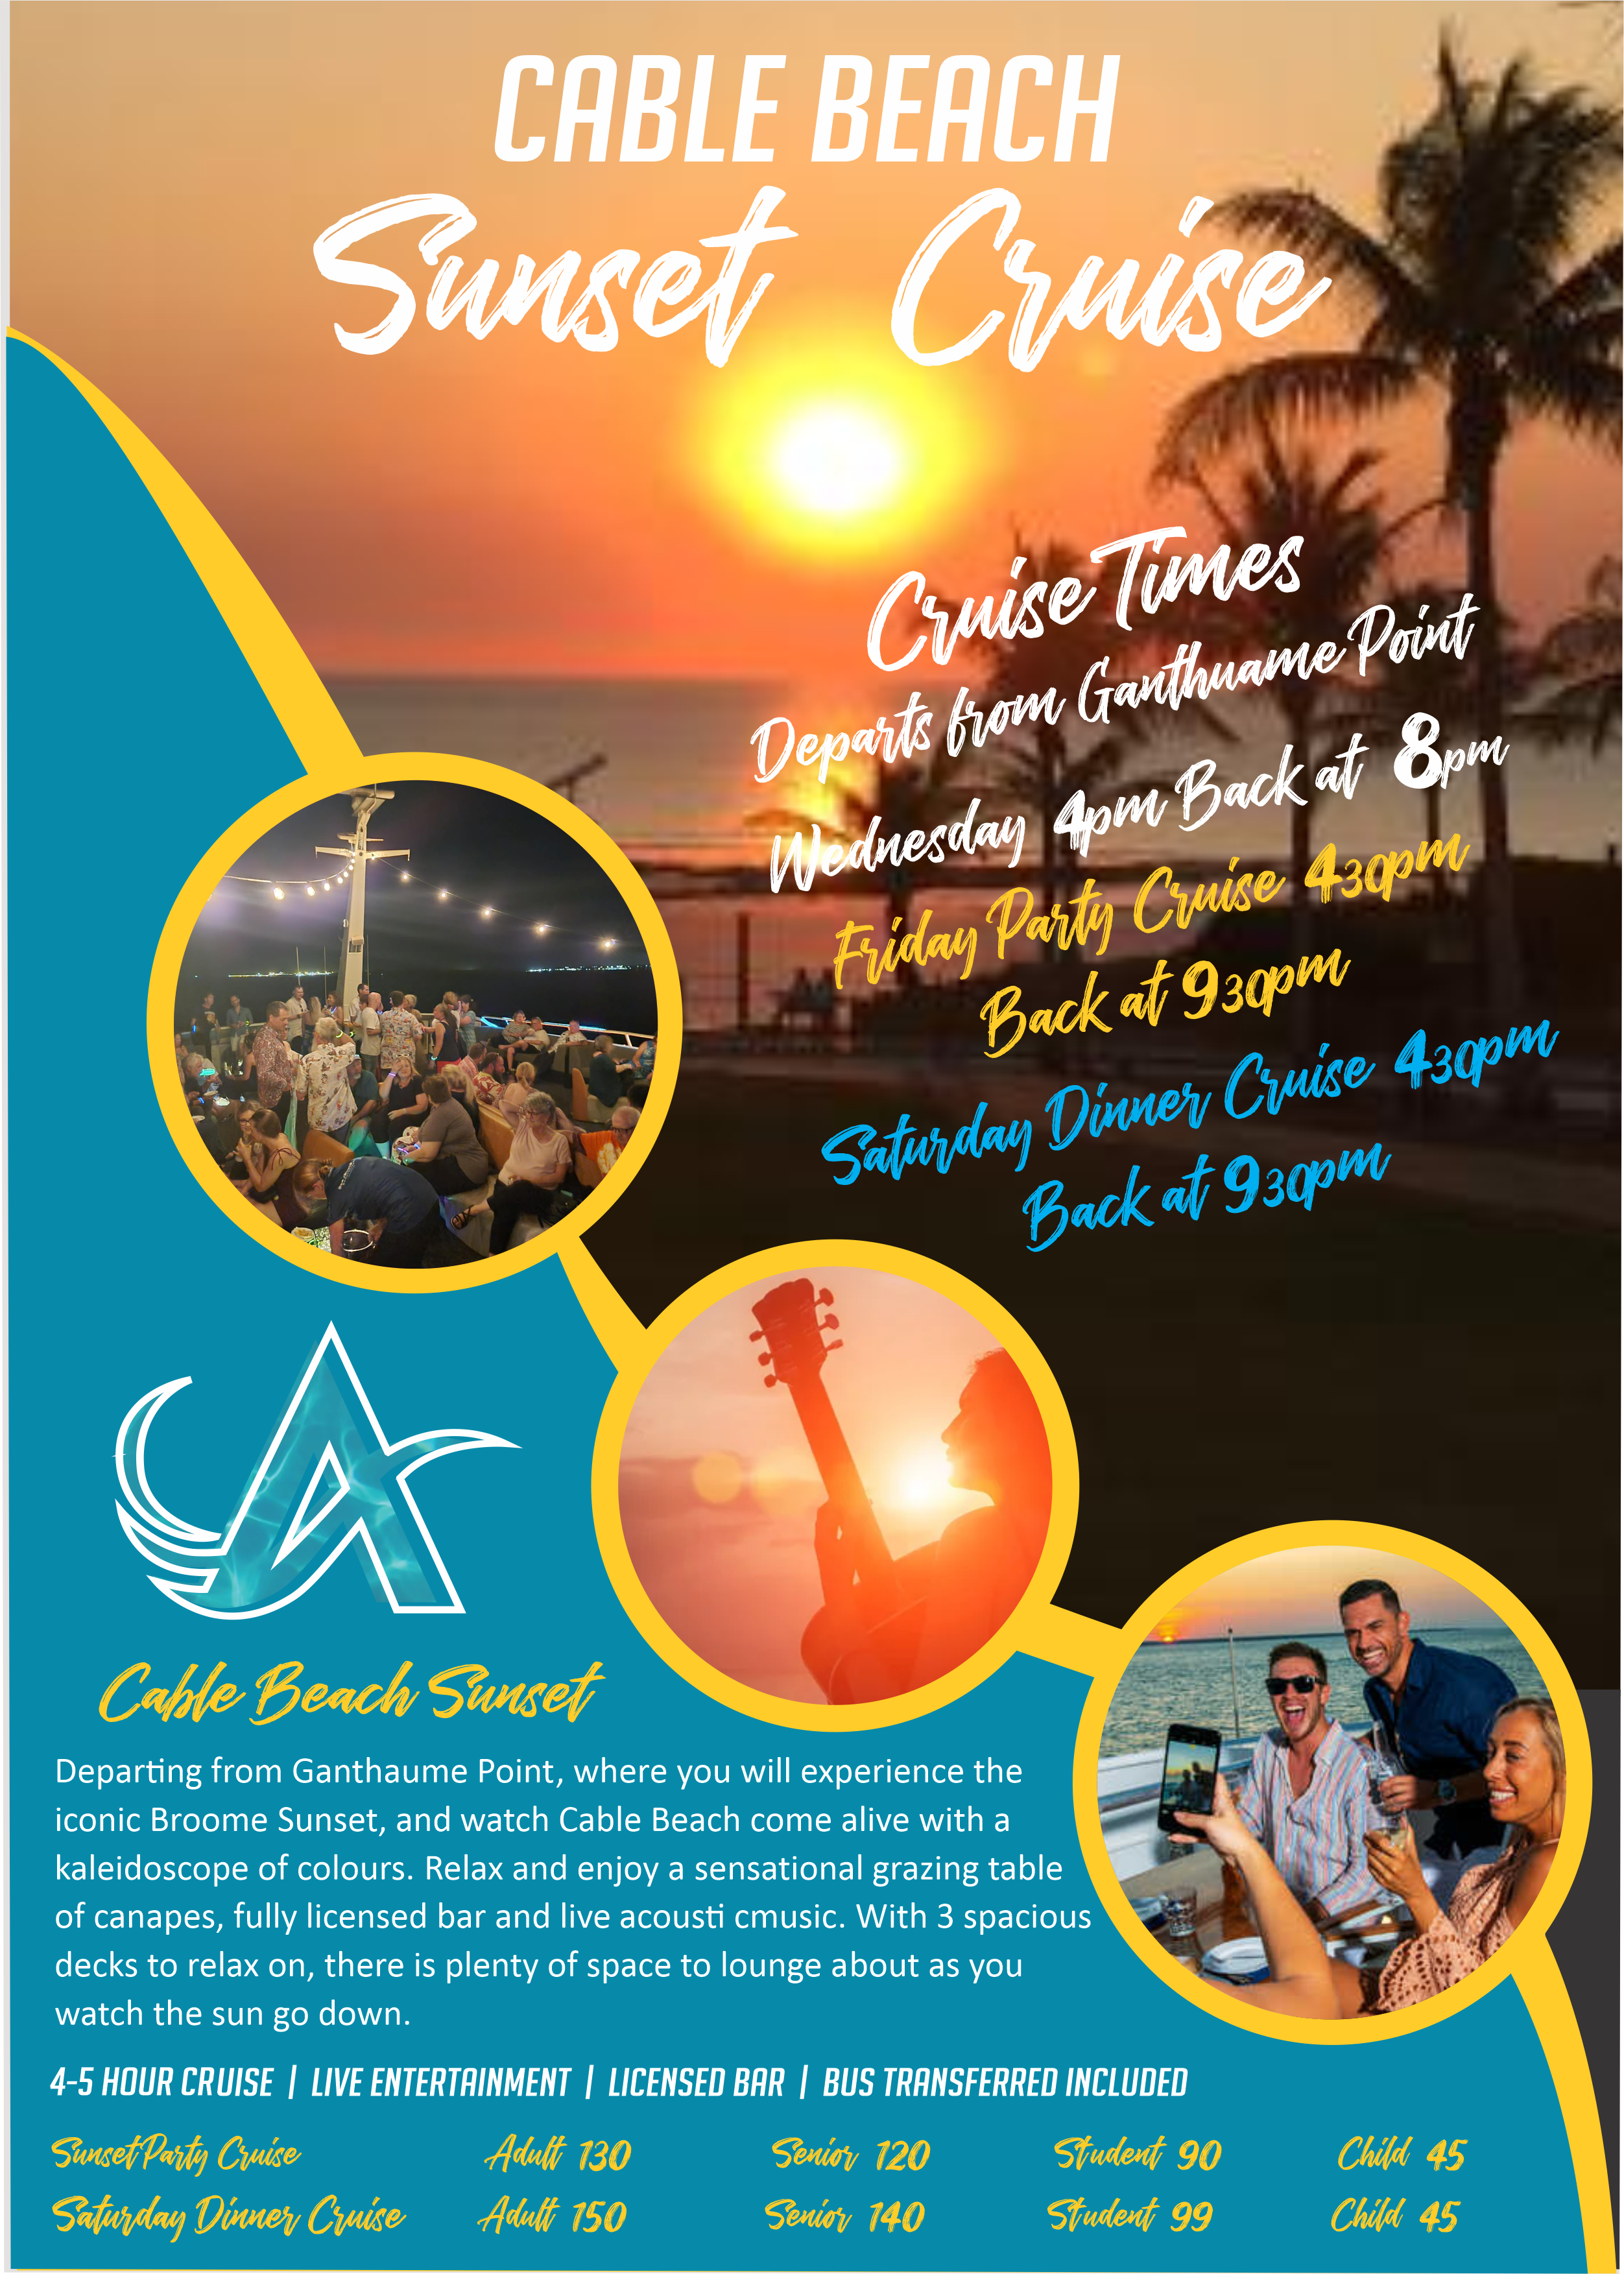 SUNSET CRUISE – Cable Beach